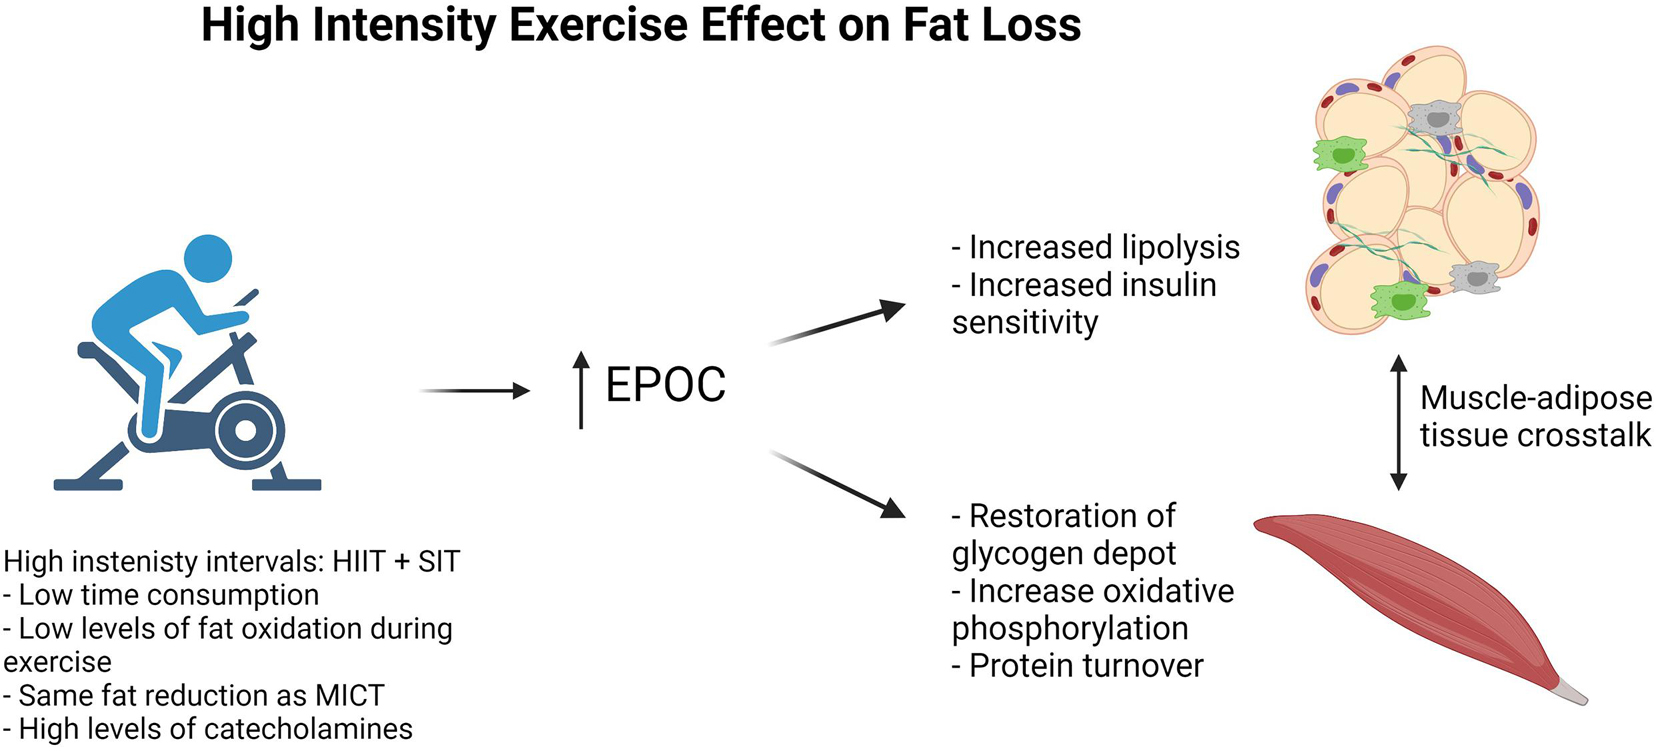 Fats and exercise performance